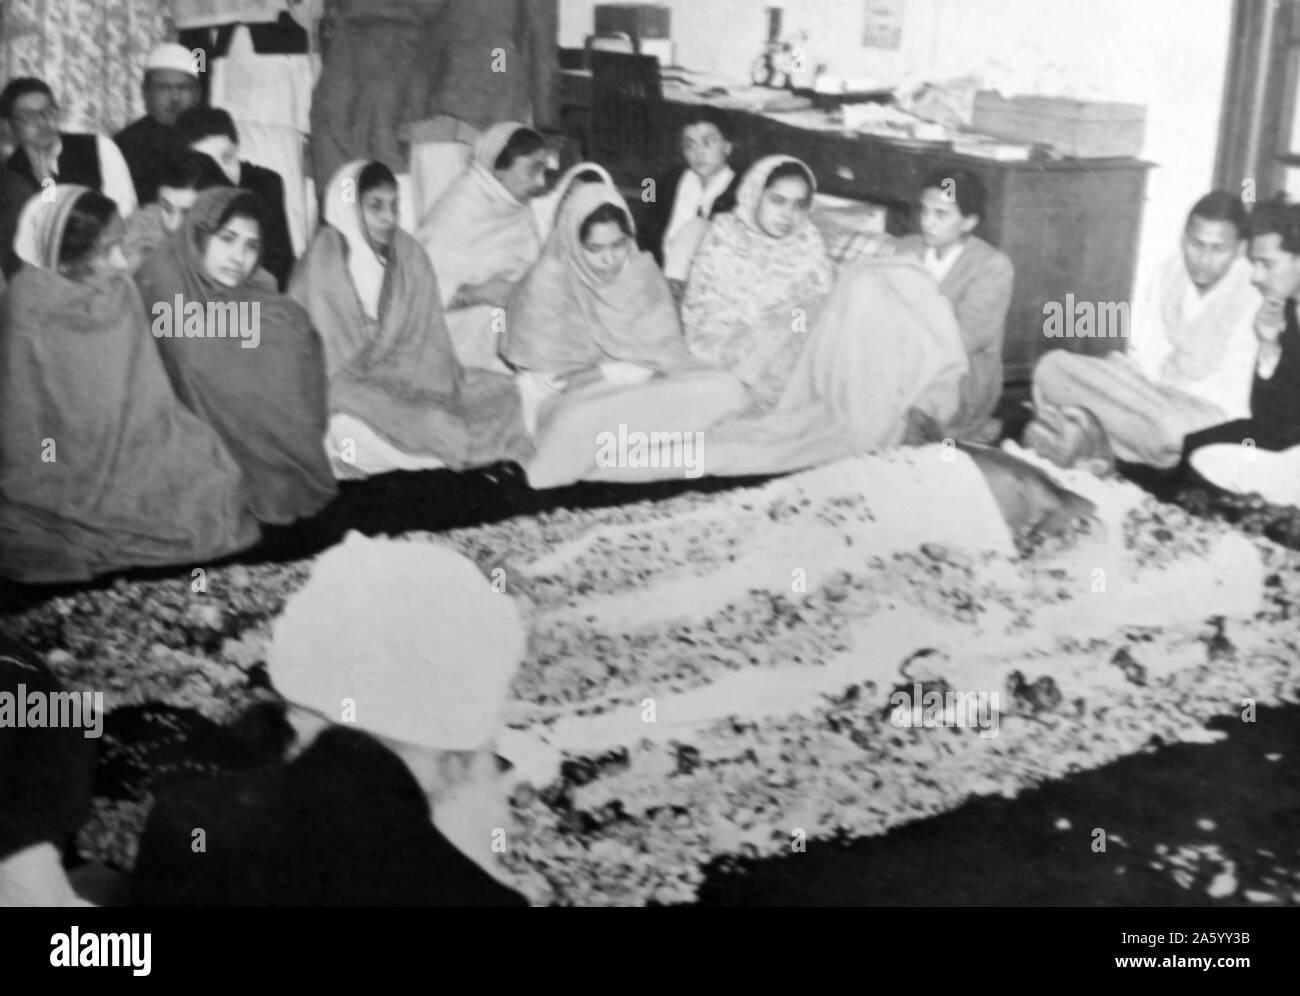 Gandhi Death High Resolution Stock Photography and Images - Alamy